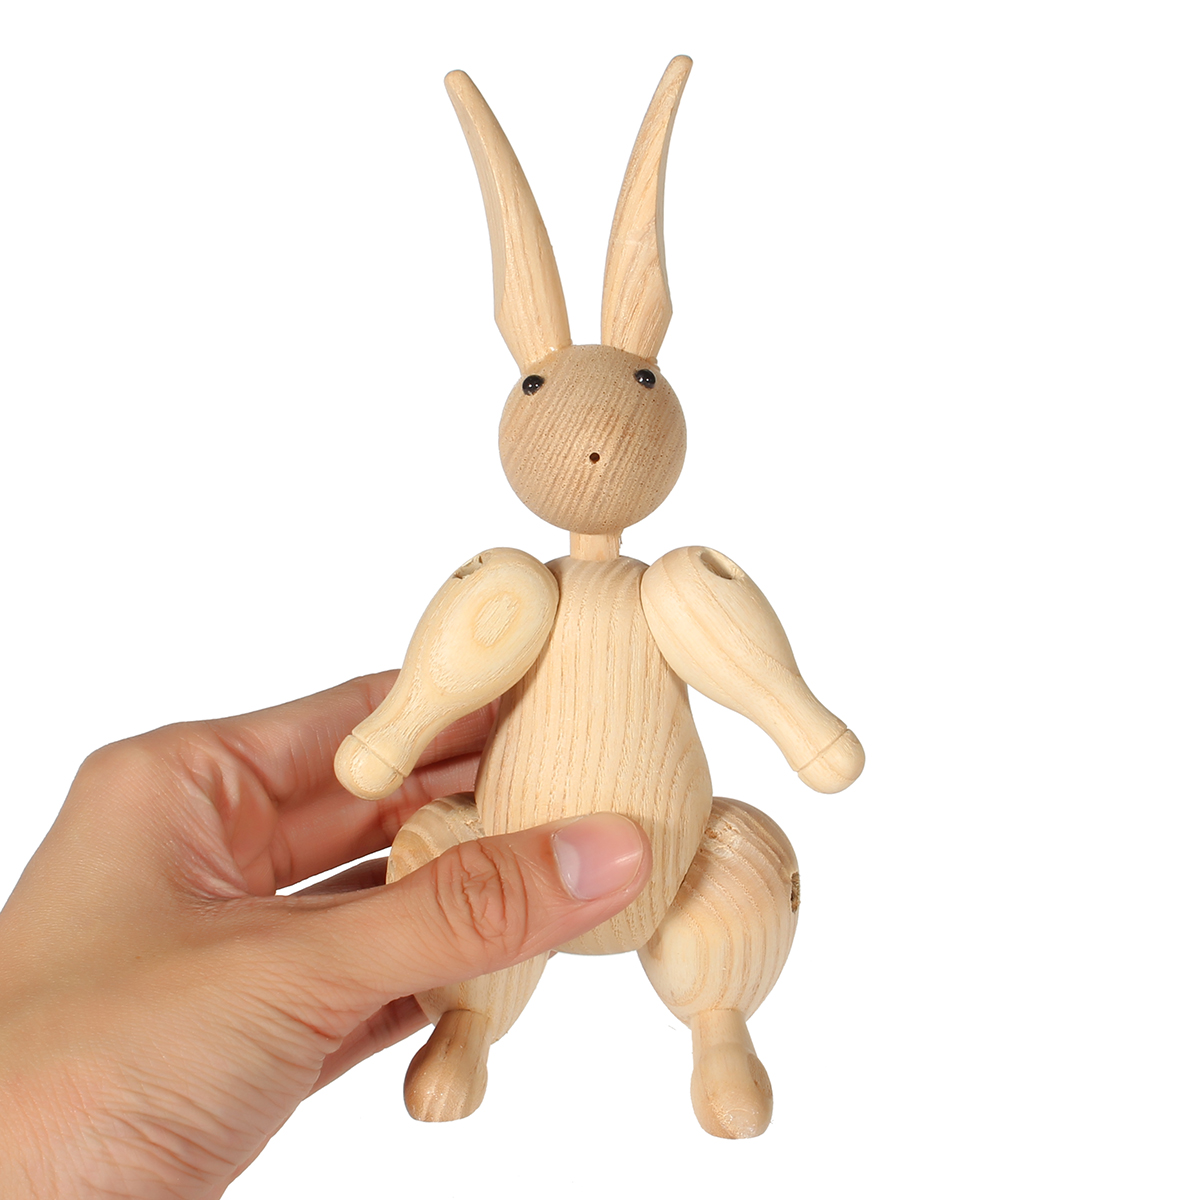 Wood-Carving-Miss-Rabbit-Figurines-Joints-Puppets-Animal-Art-Home-Decoration-Crafts-1241724-2